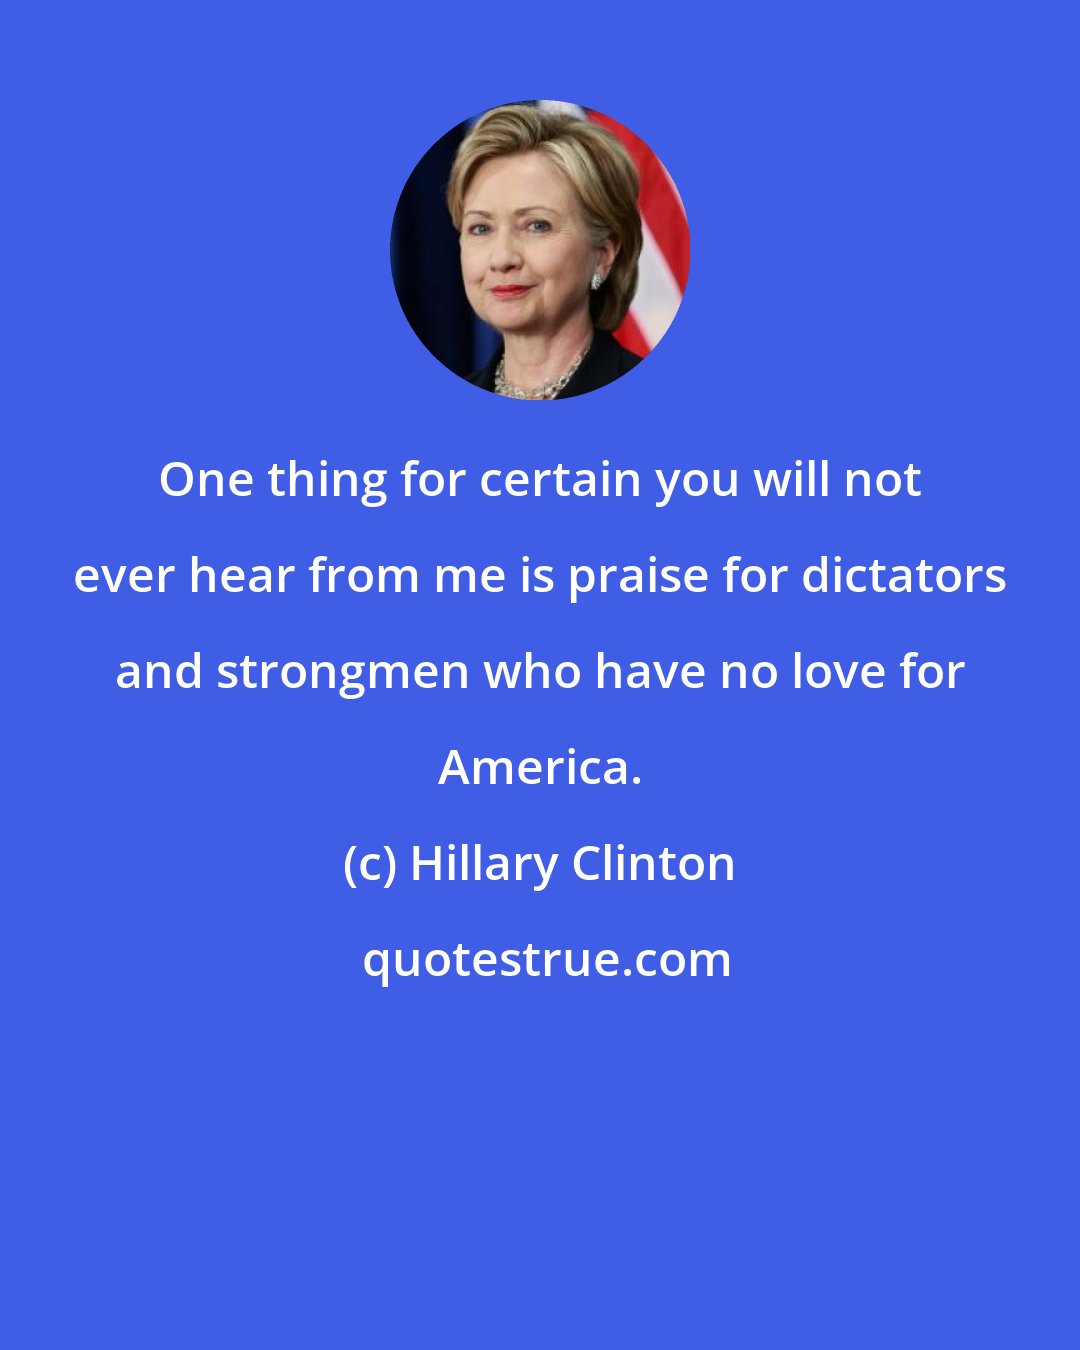 Hillary Clinton: One thing for certain you will not ever hear from me is praise for dictators and strongmen who have no love for America.